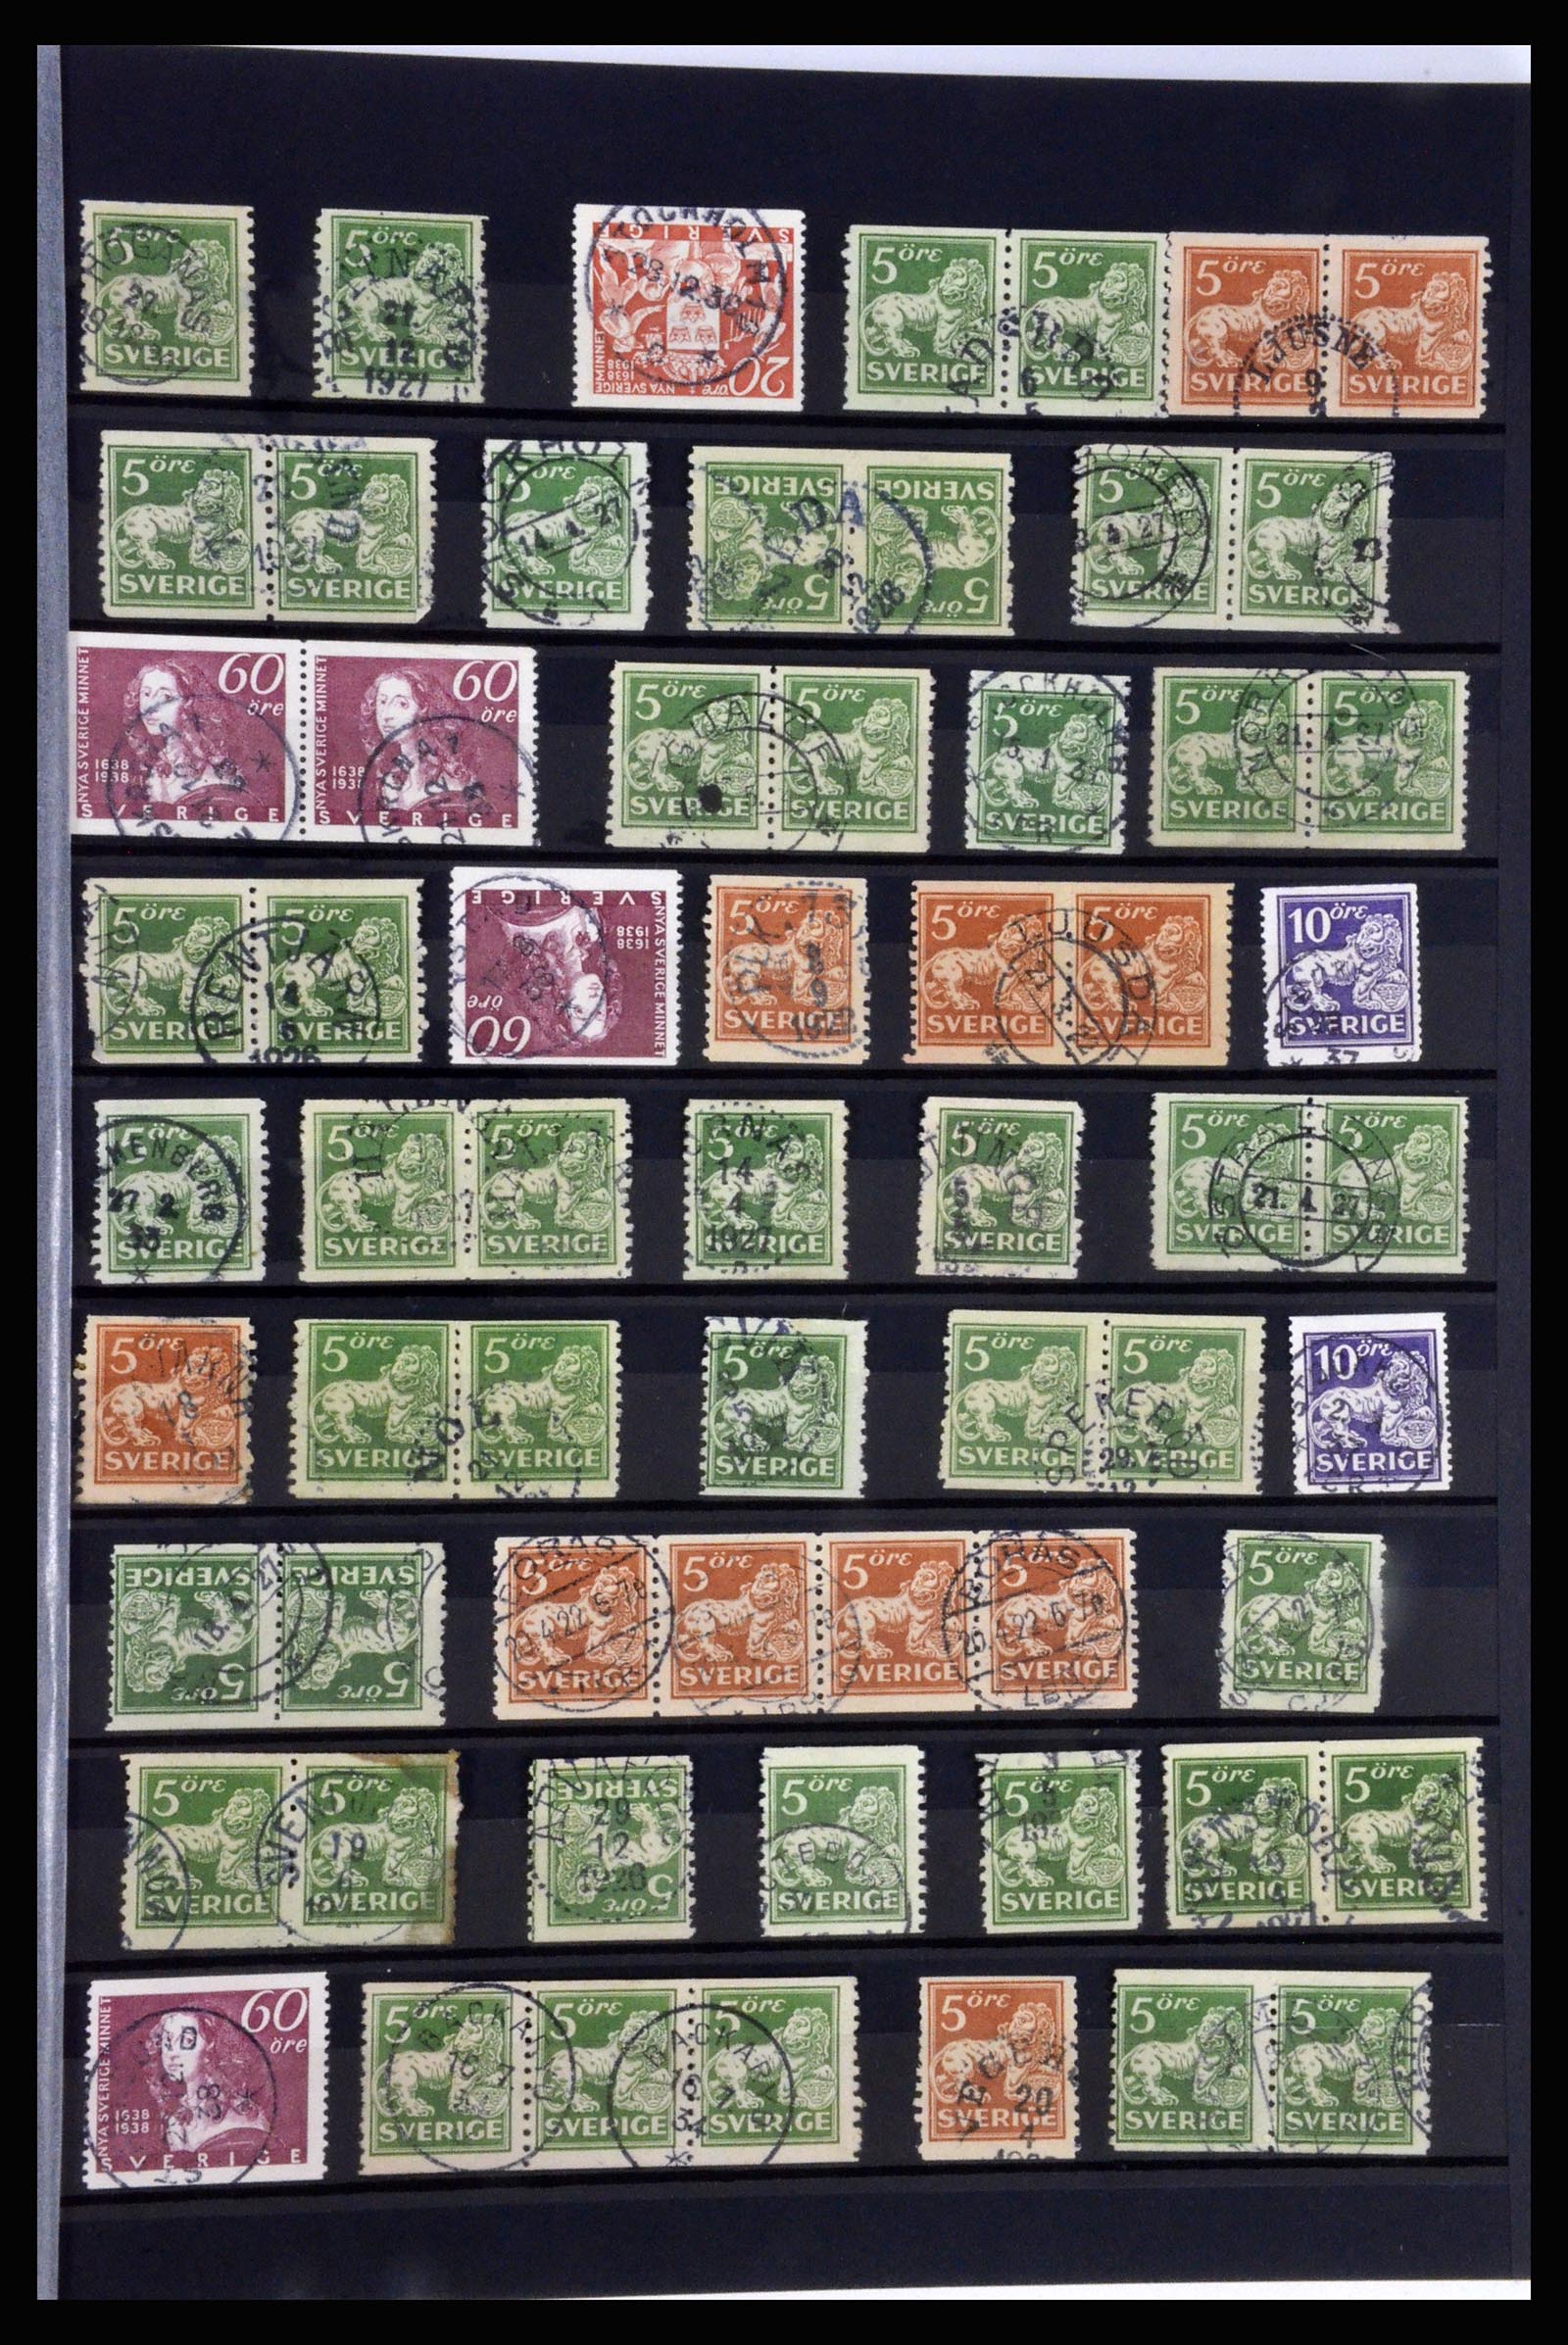 36316 021 - Stamp collection 36316 Sweden cancellations 1920-1938.